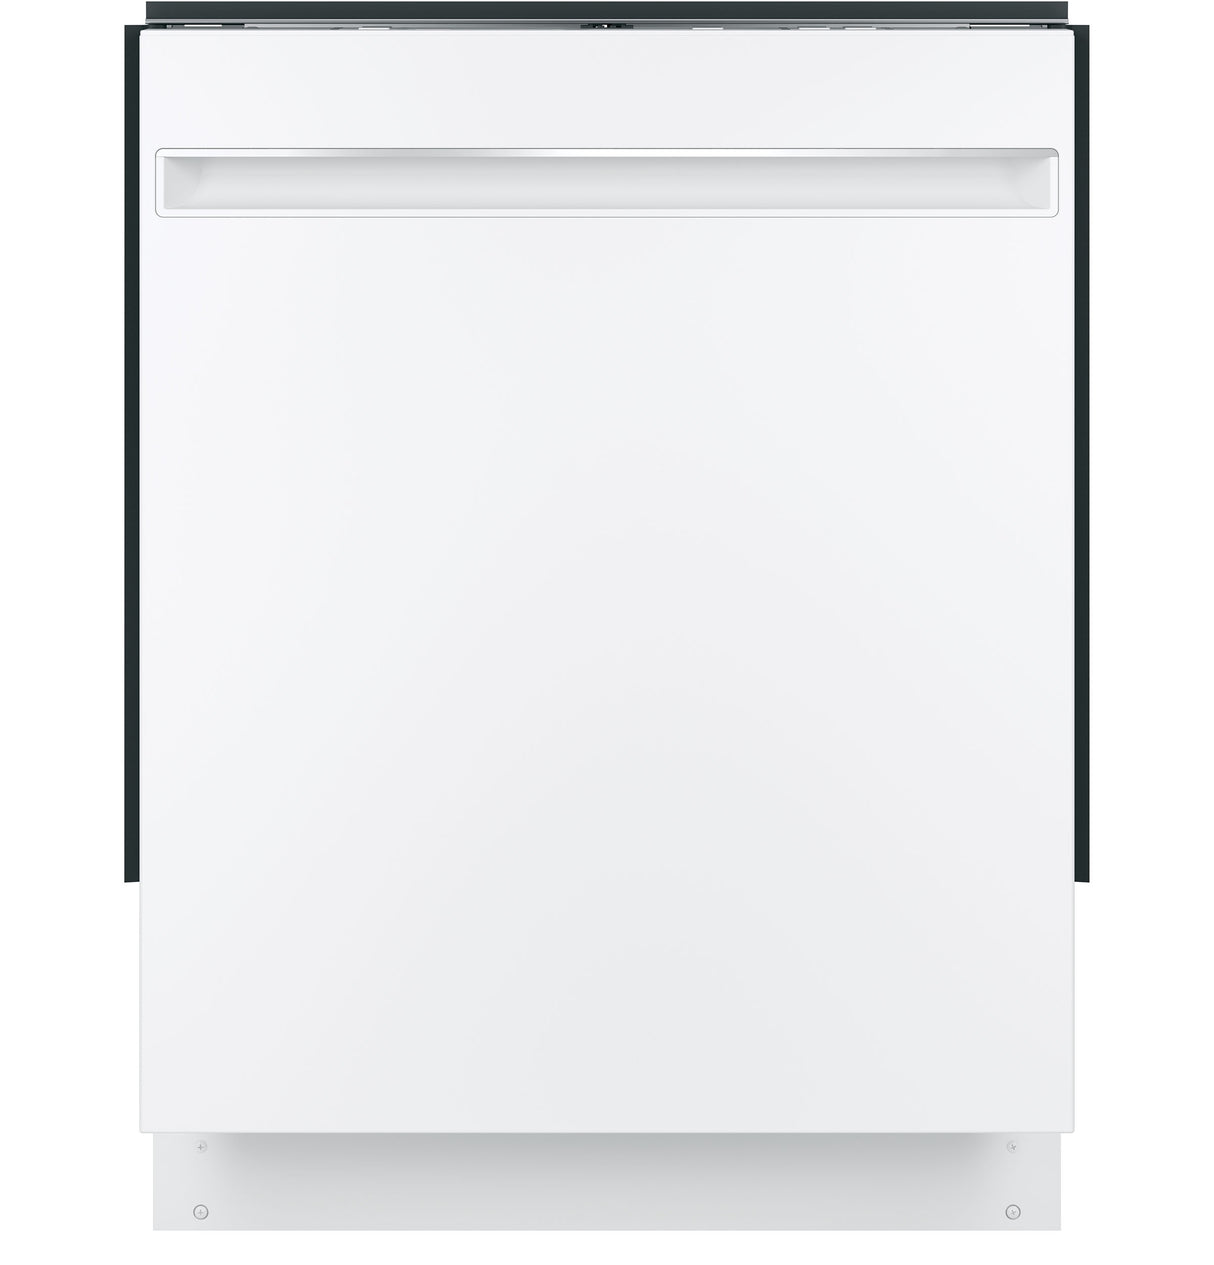 GE(R) ENERGY STAR(R) ADA Compliant Stainless Steel Interior Dishwasher with Sanitize Cycle - (GDT225SGLWW)